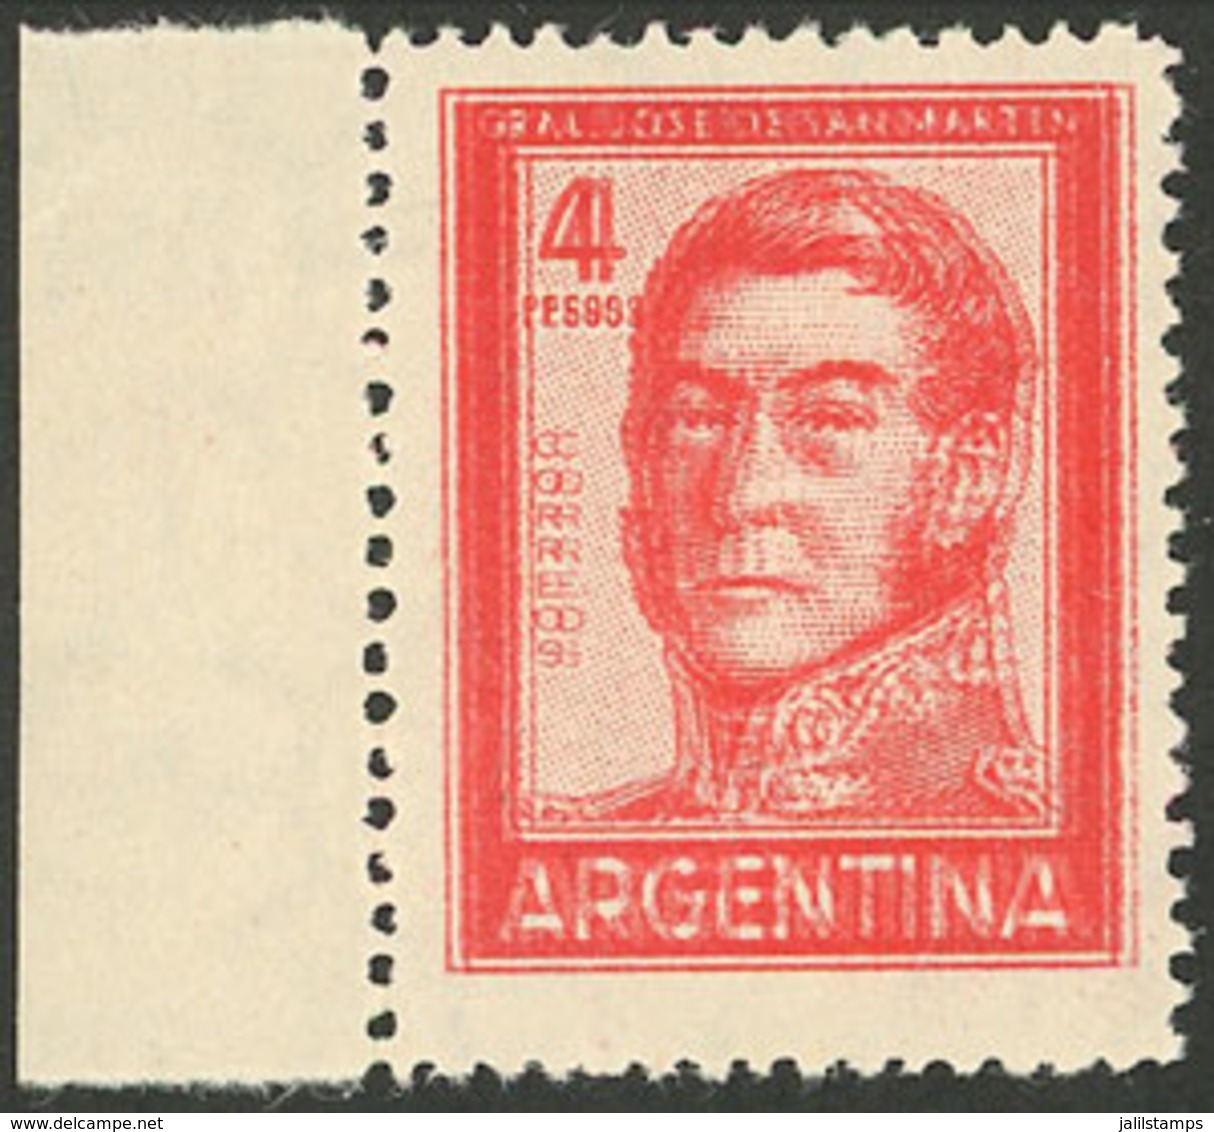 ARGENTINA: GJ.1138a, Spectacular COMPLETE DOUBLE IMPRESSION, Superb And Rare! - Ongebruikt